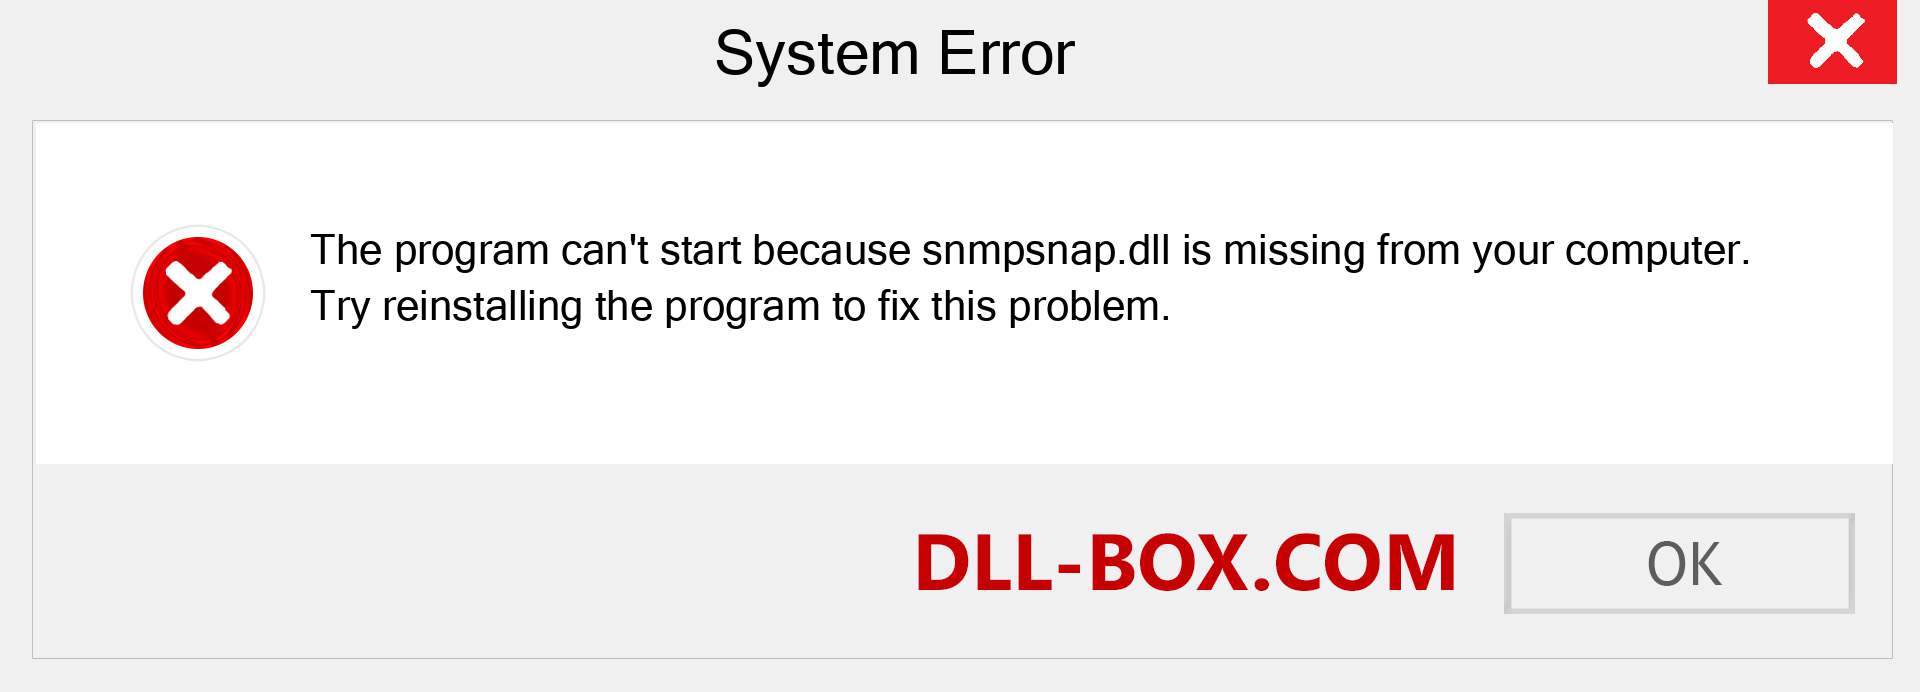  snmpsnap.dll file is missing?. Download for Windows 7, 8, 10 - Fix  snmpsnap dll Missing Error on Windows, photos, images